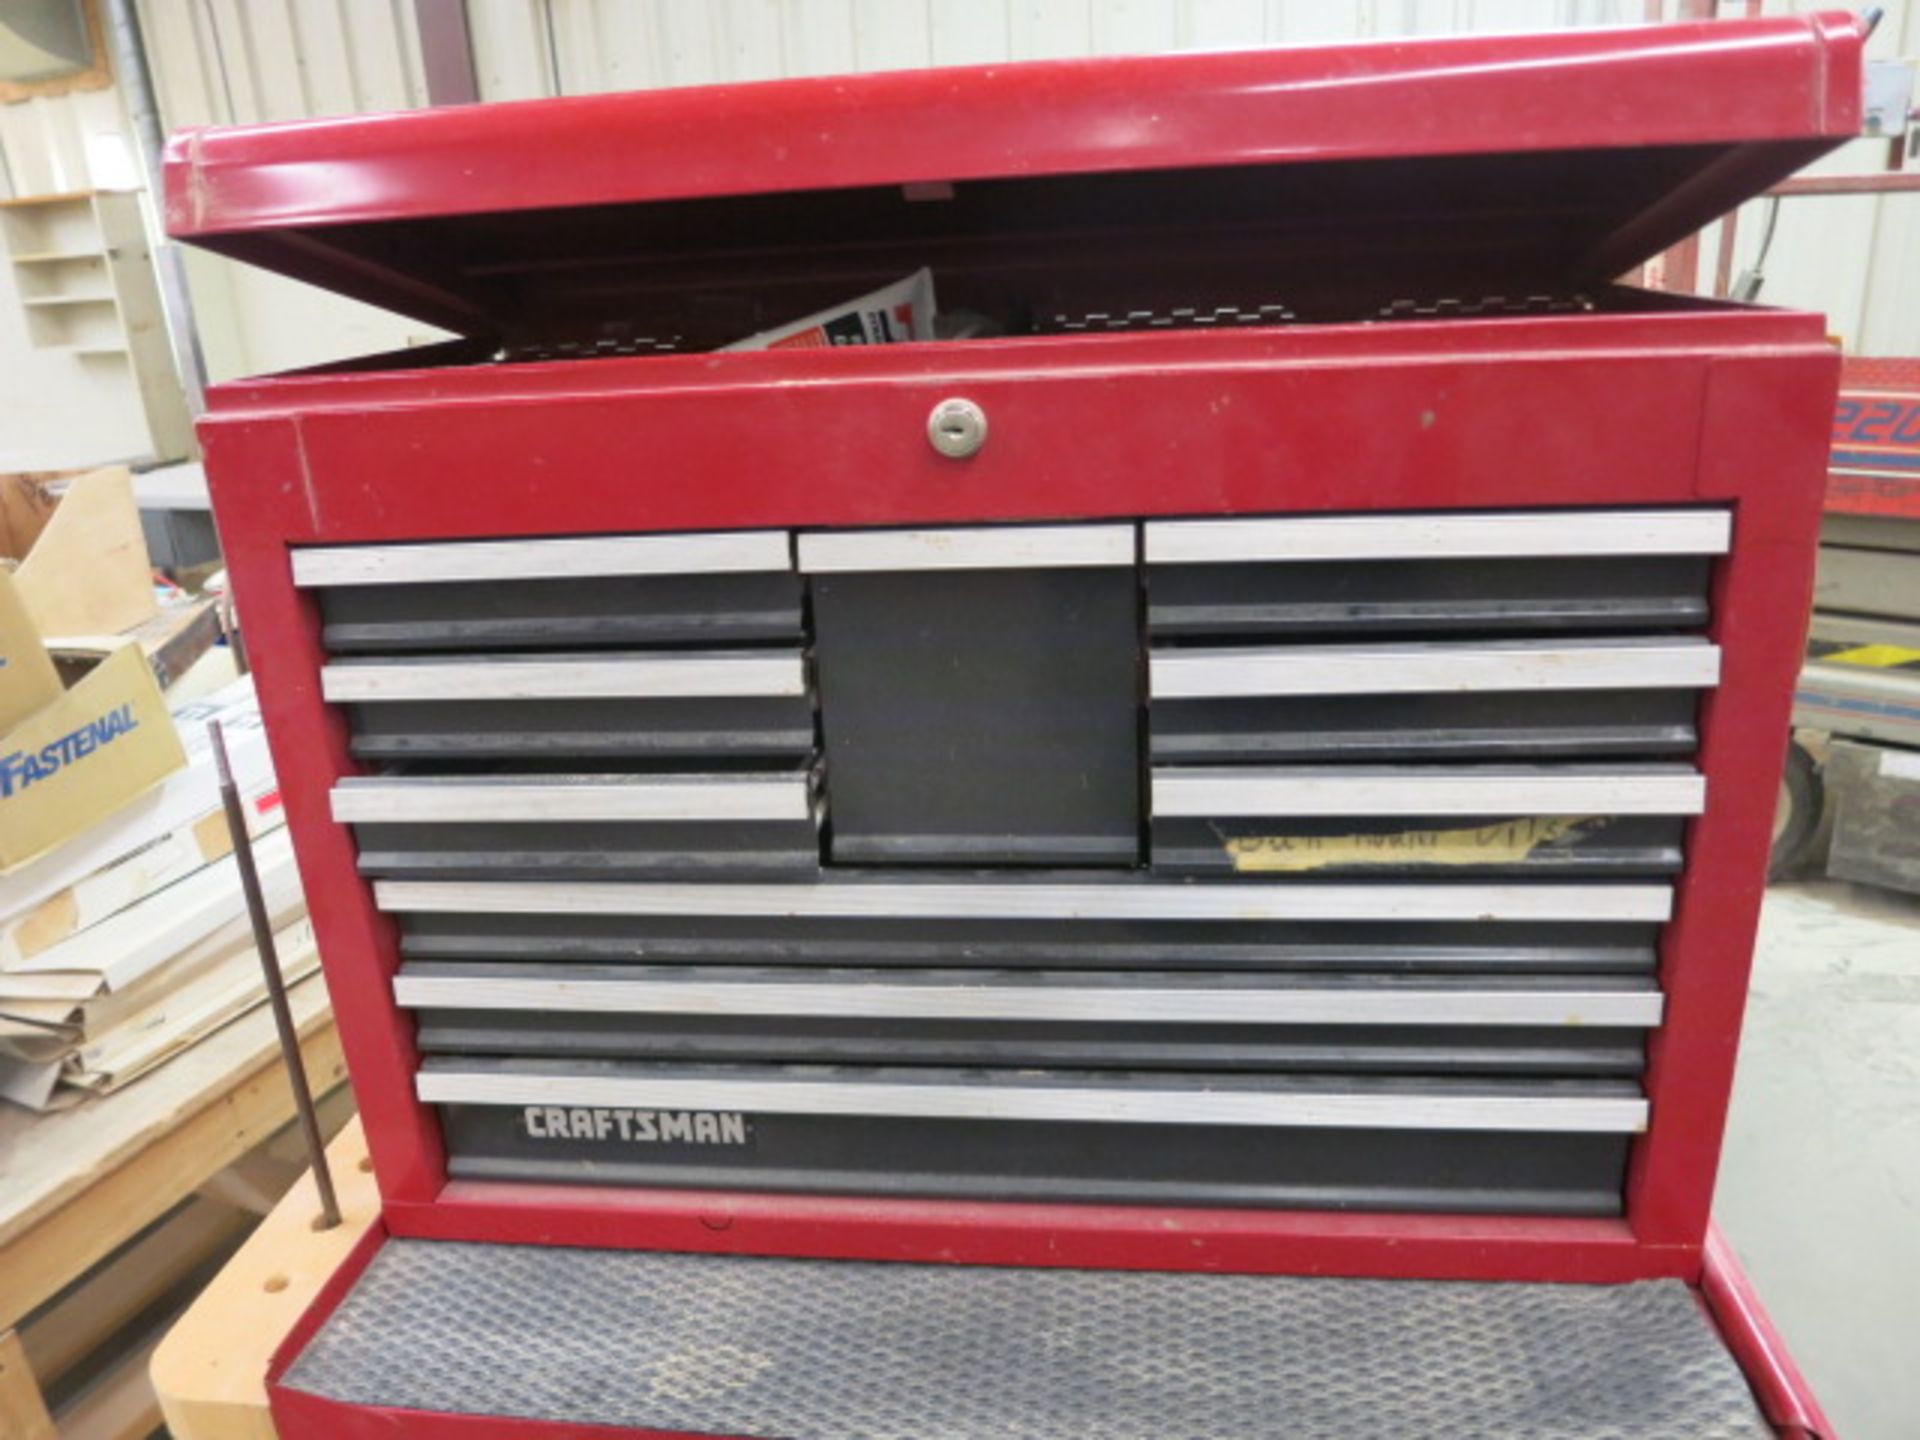 Craftsman Tool Cabinet with Contents - removal available October 26, 2018 - Bild 2 aus 4